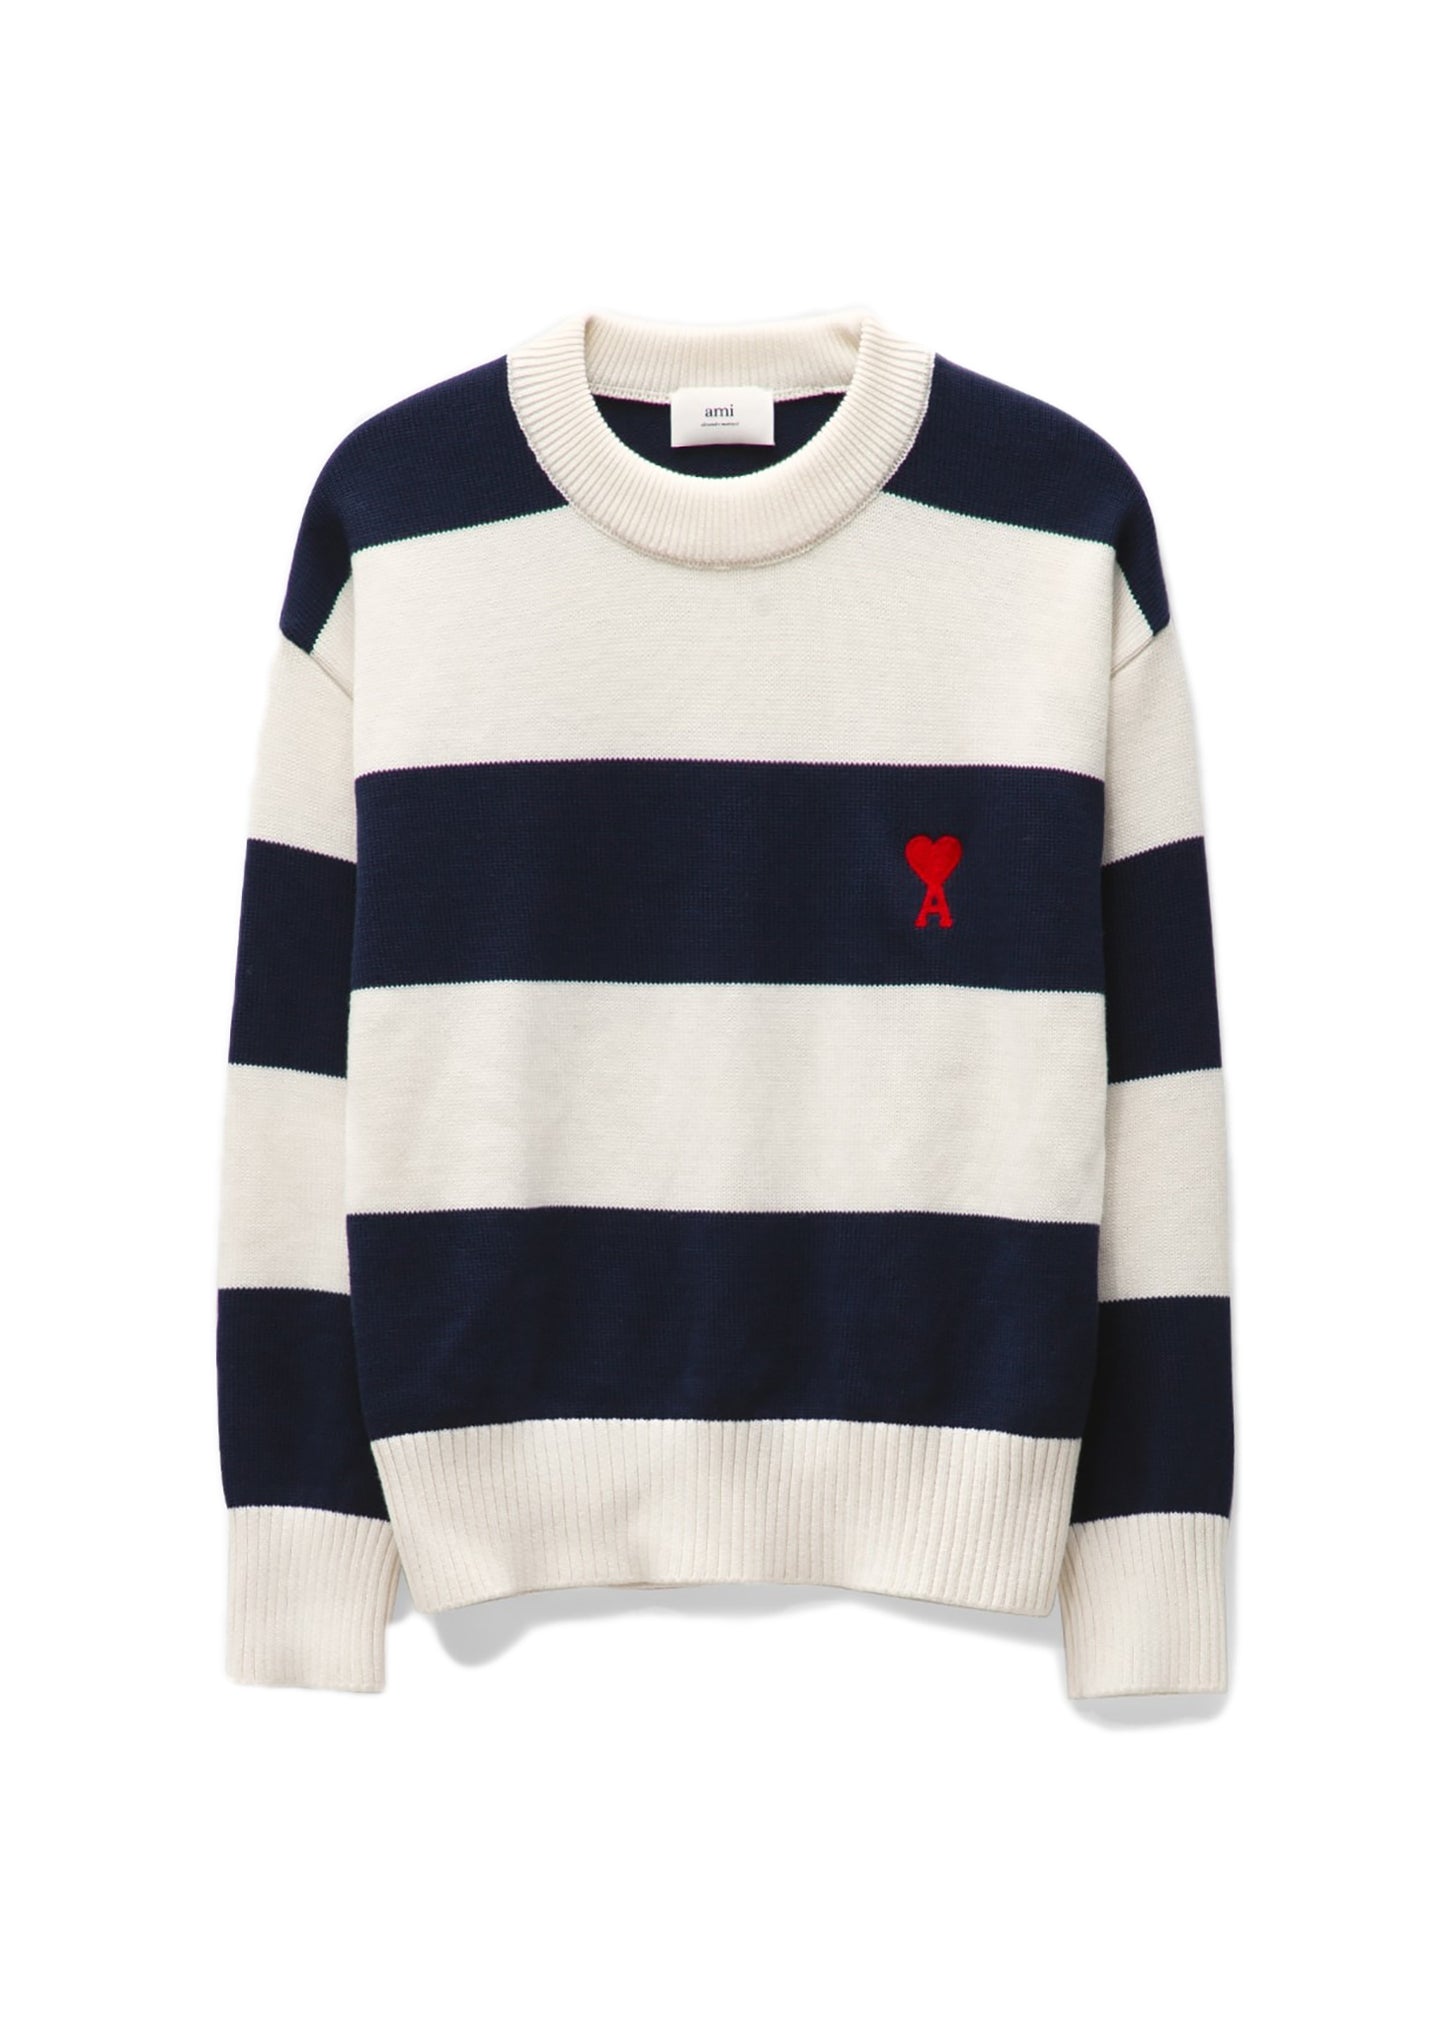 ADC Rugby Stripes Sweater